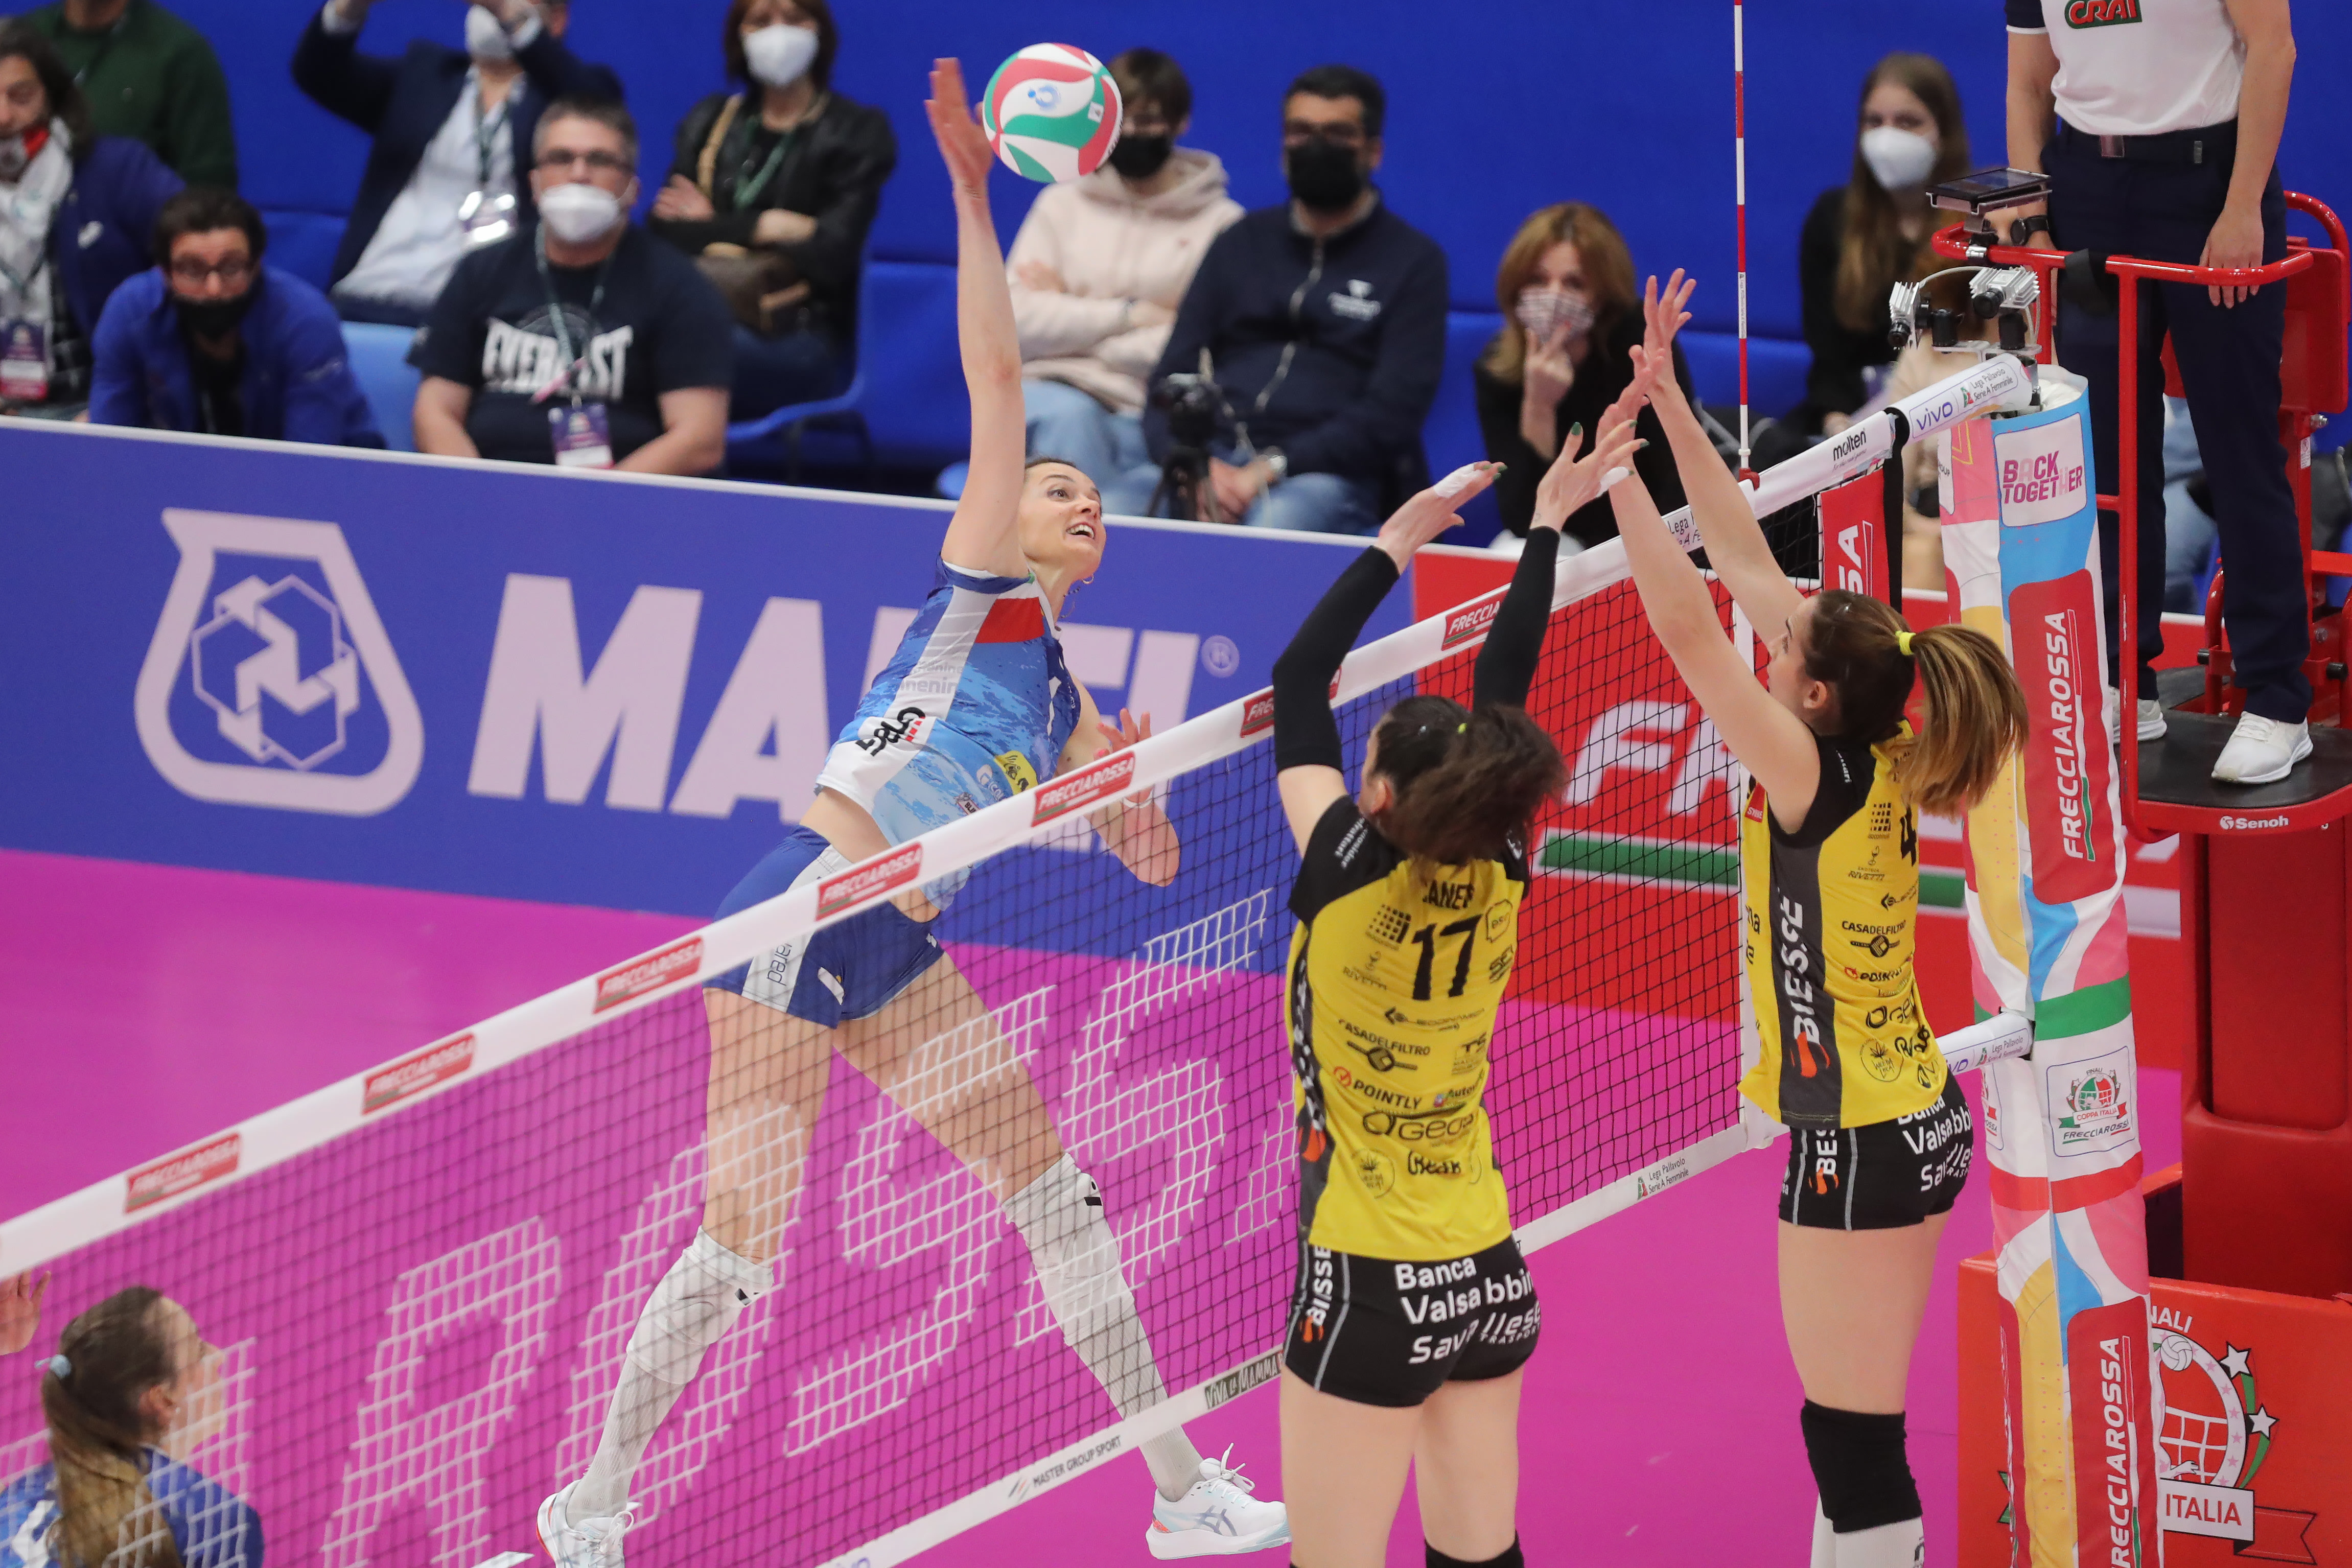 Serie A2 Femminile live streams on new Volleyball World Italia YouTube channel volleyballworld